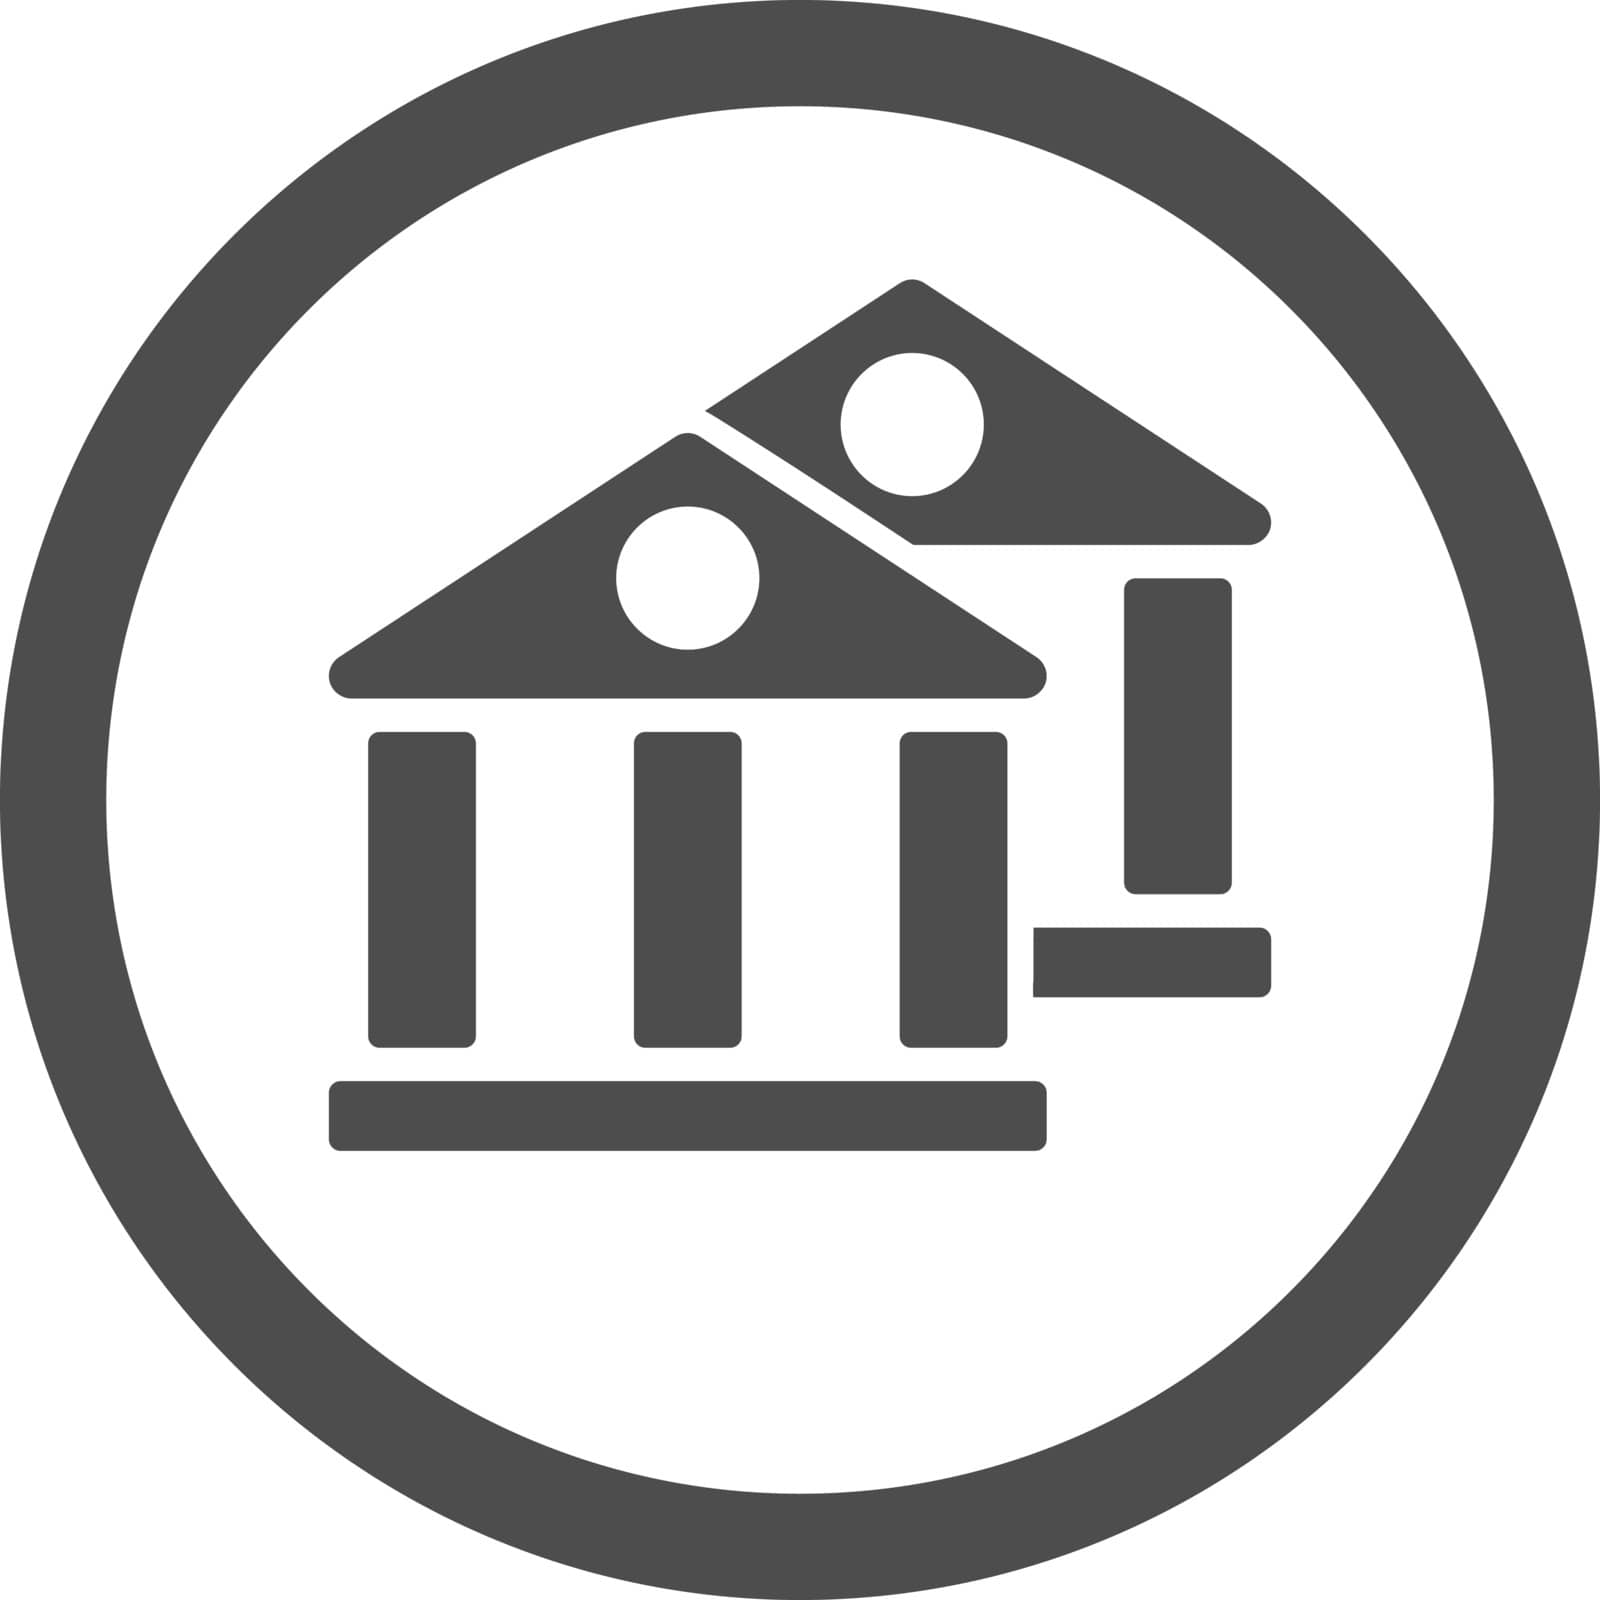 Banks vector icon. This flat rounded symbol uses gray color and isolated on a white background.